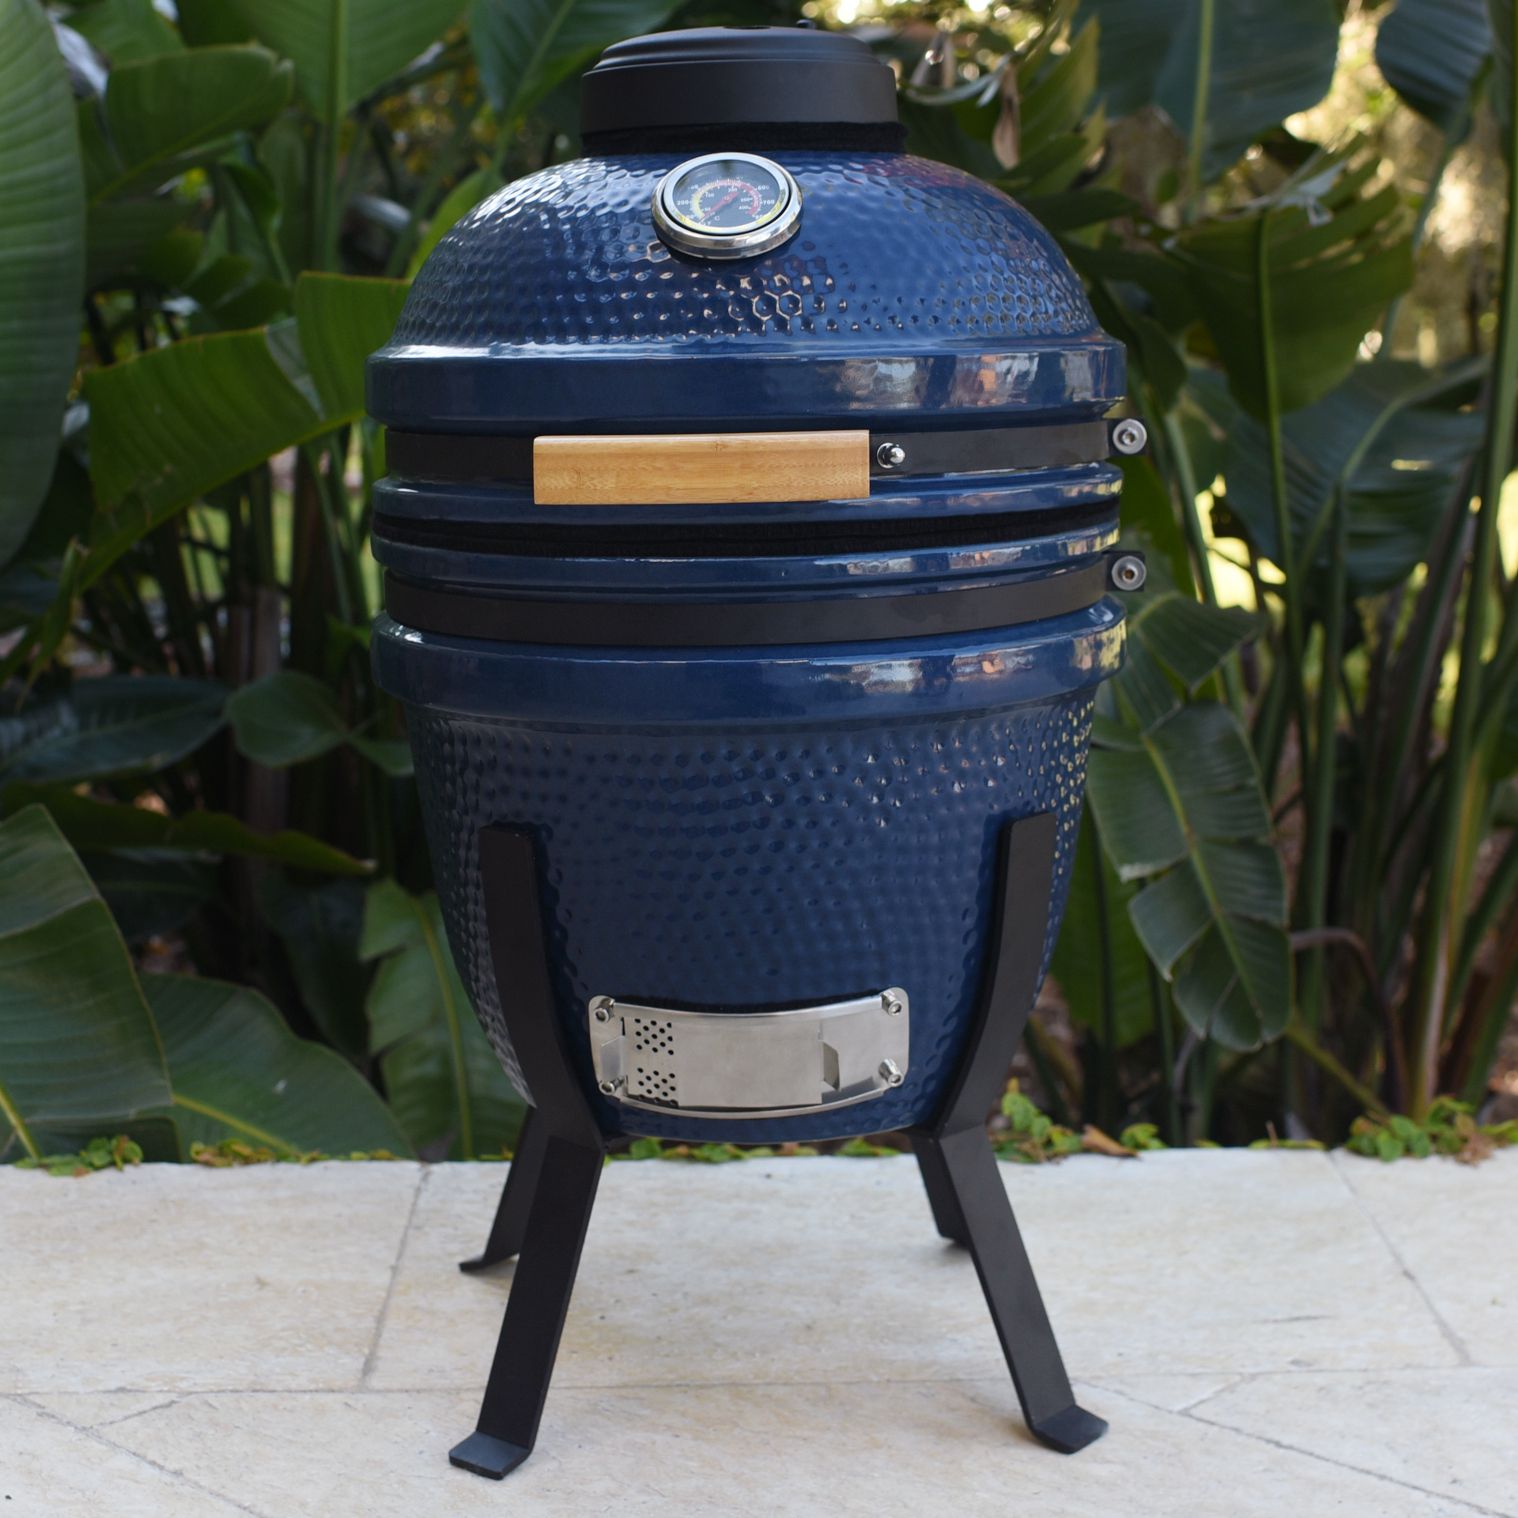 Lifesmart Deen Brothers Series 15" Blue Kamado Ceramic Grill Value Bundle  Includes Electric Starter Cooking Stone And Cover – Walmart Throughout Brode Ceramic Garden Stools (View 19 of 25)